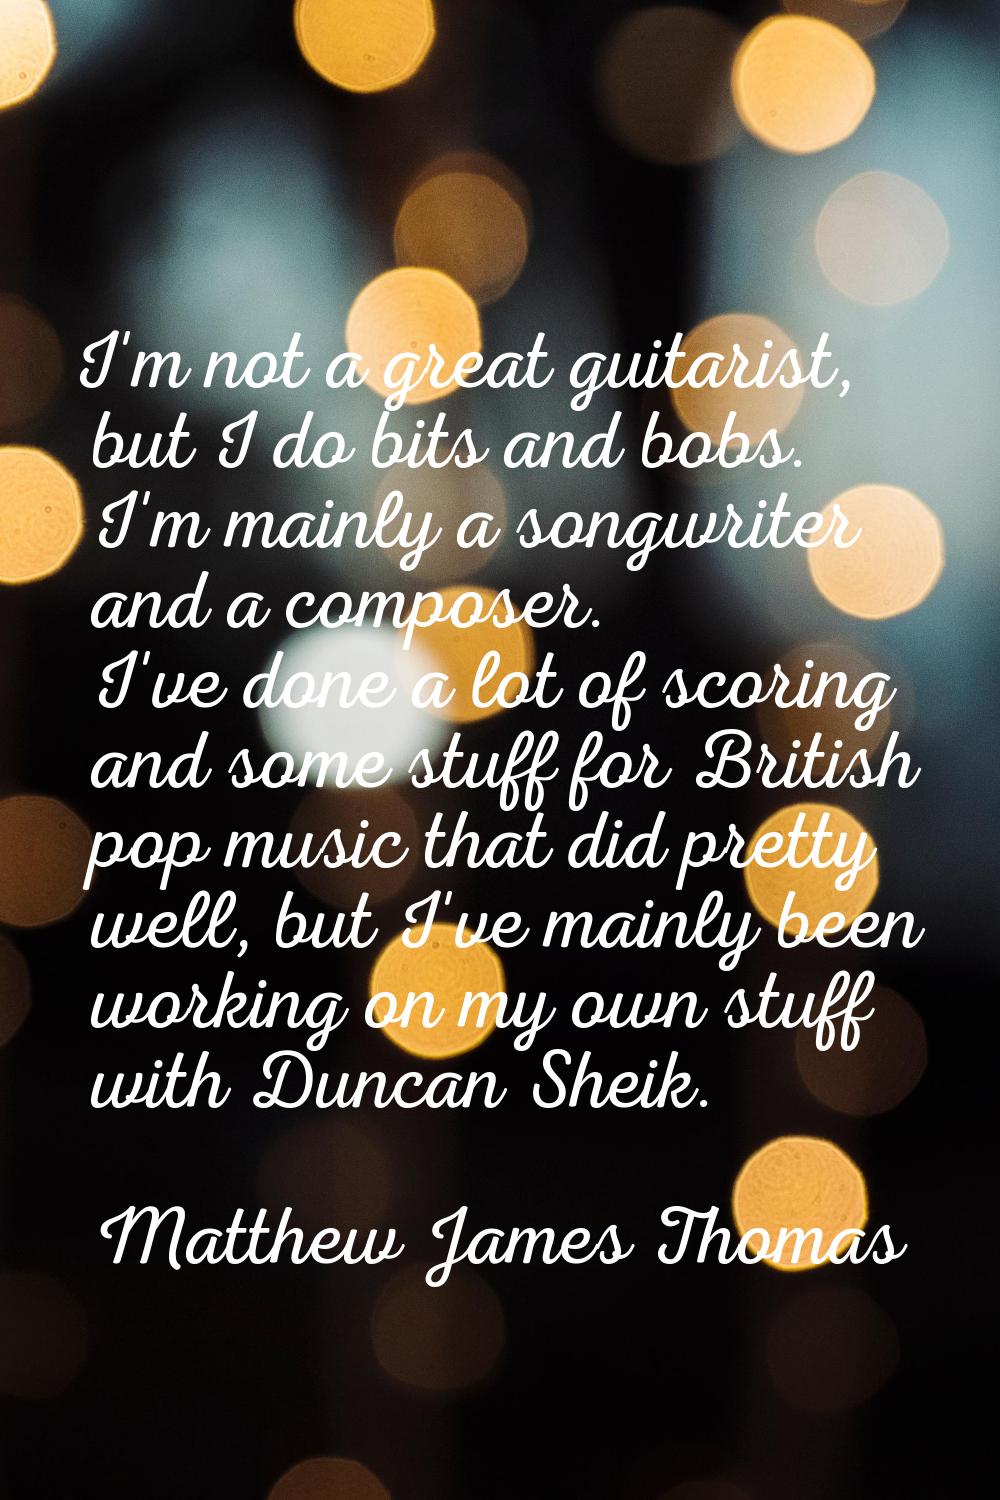 I'm not a great guitarist, but I do bits and bobs. I'm mainly a songwriter and a composer. I've don